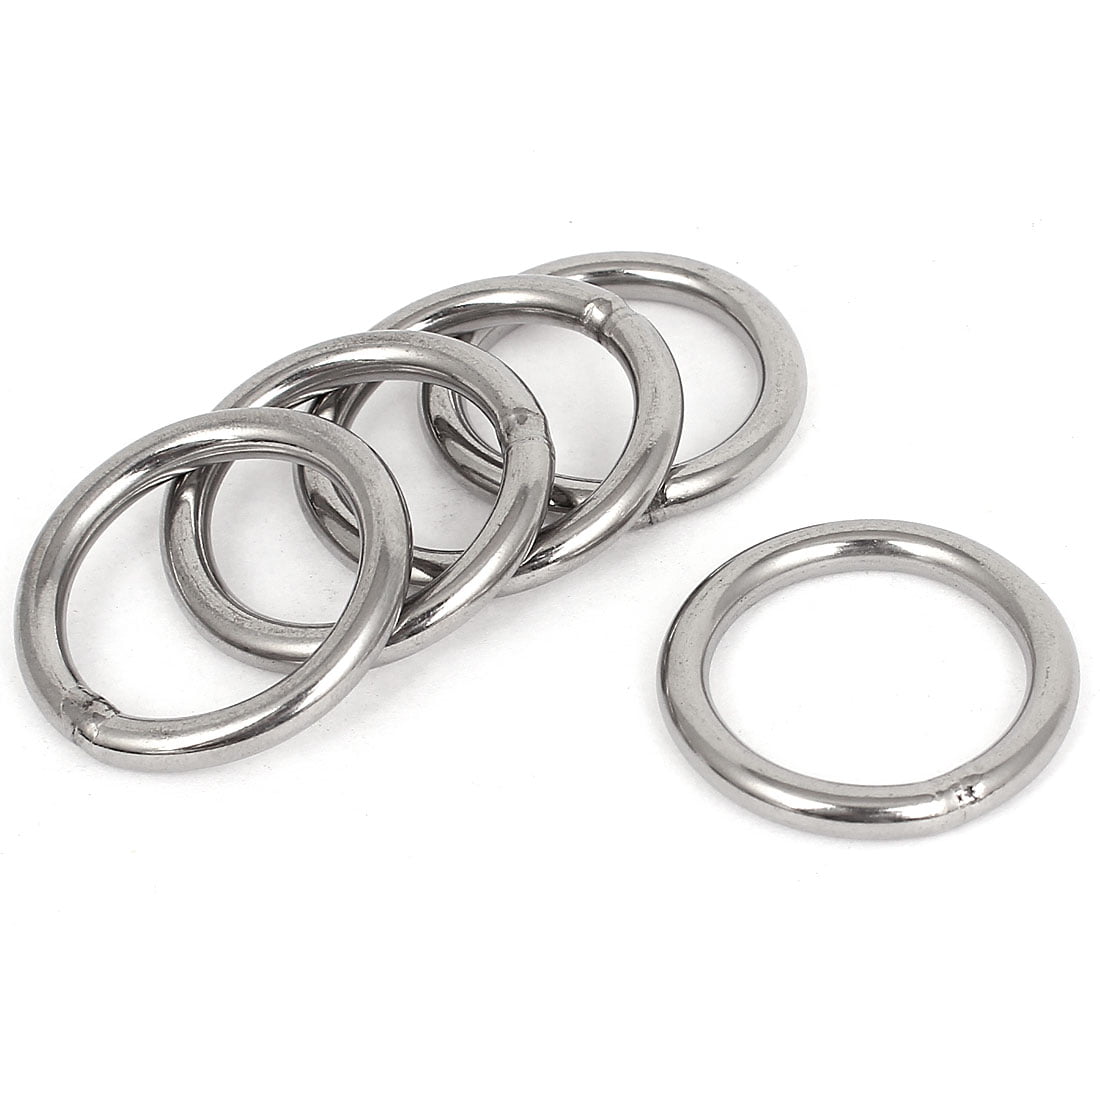 30mm x 3mm Stainless Steel Webbing Strapping Welded O Rings 5 Pcs Z4F6 